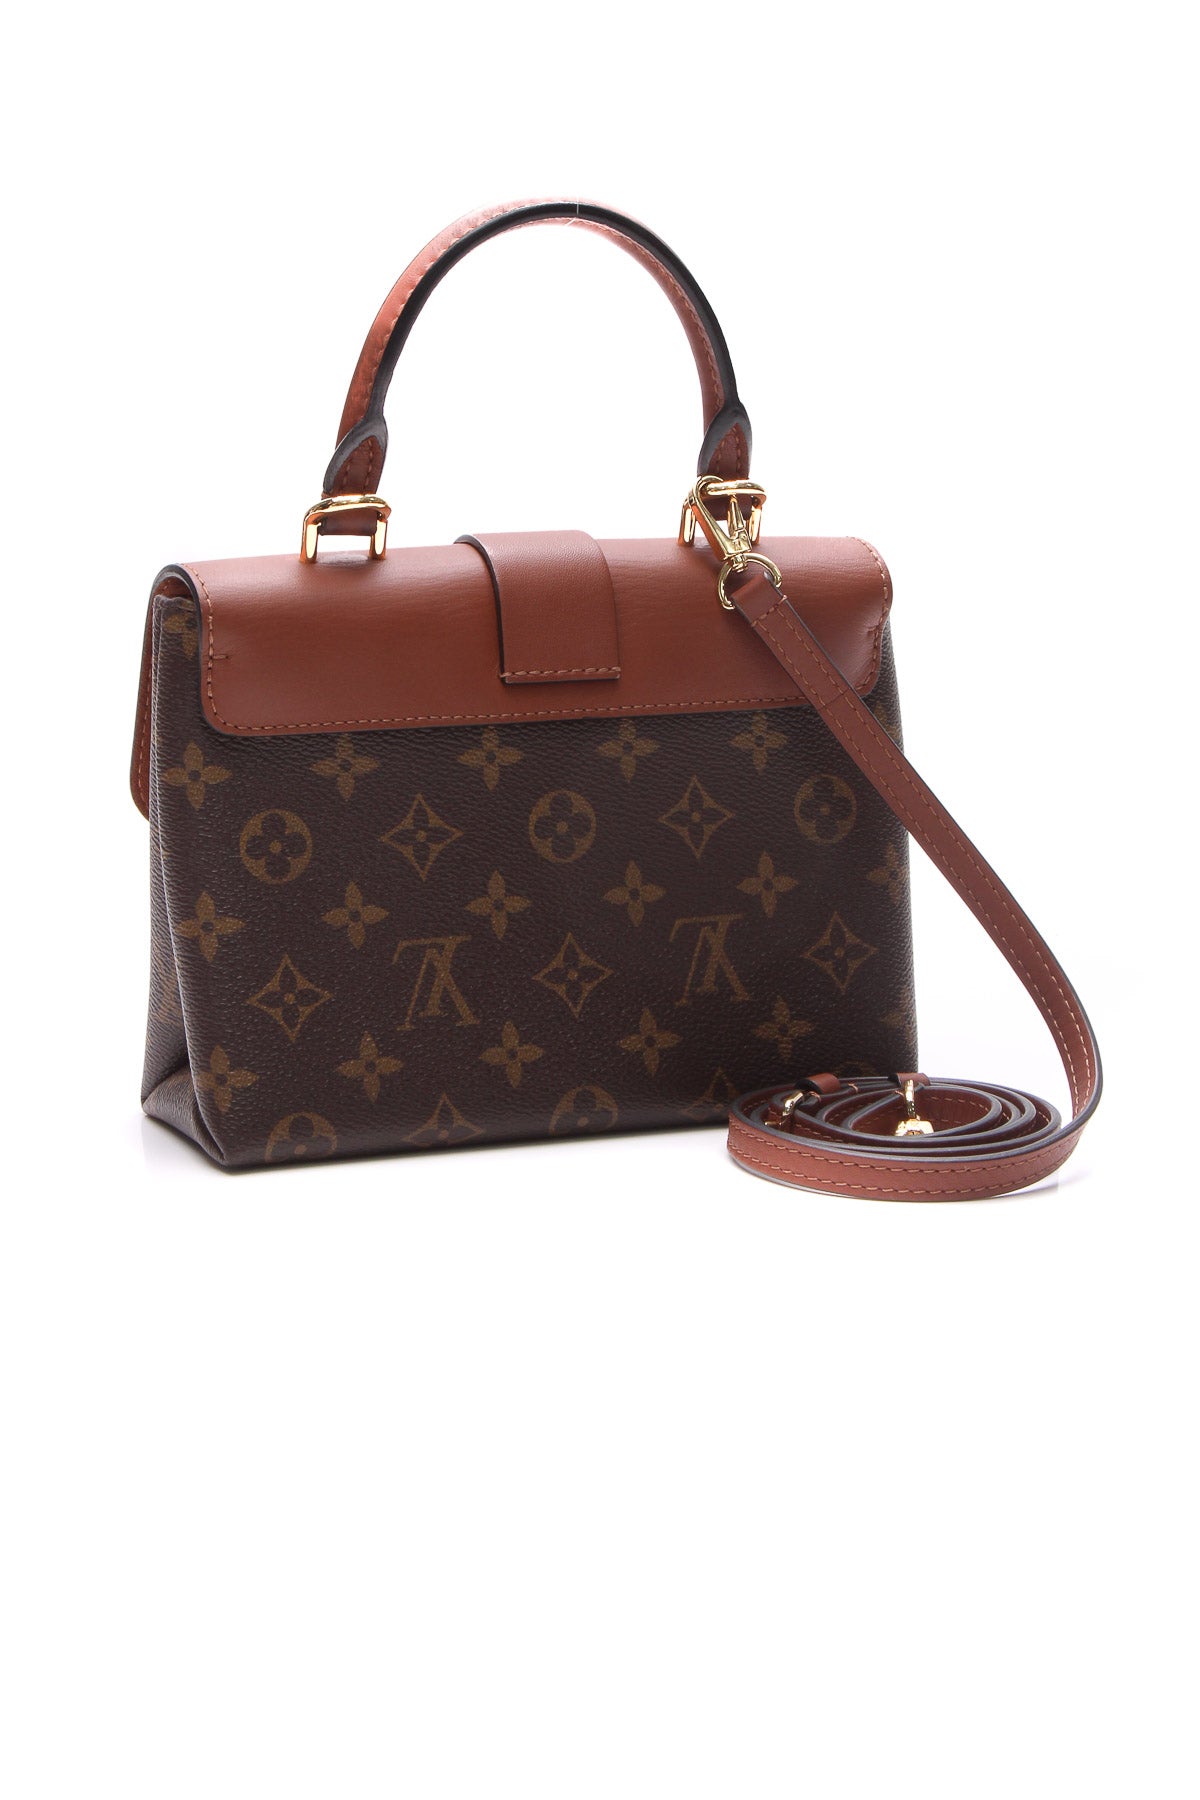 Louis Vuitton Clutch Box Luxembourg, SAVE 31% 